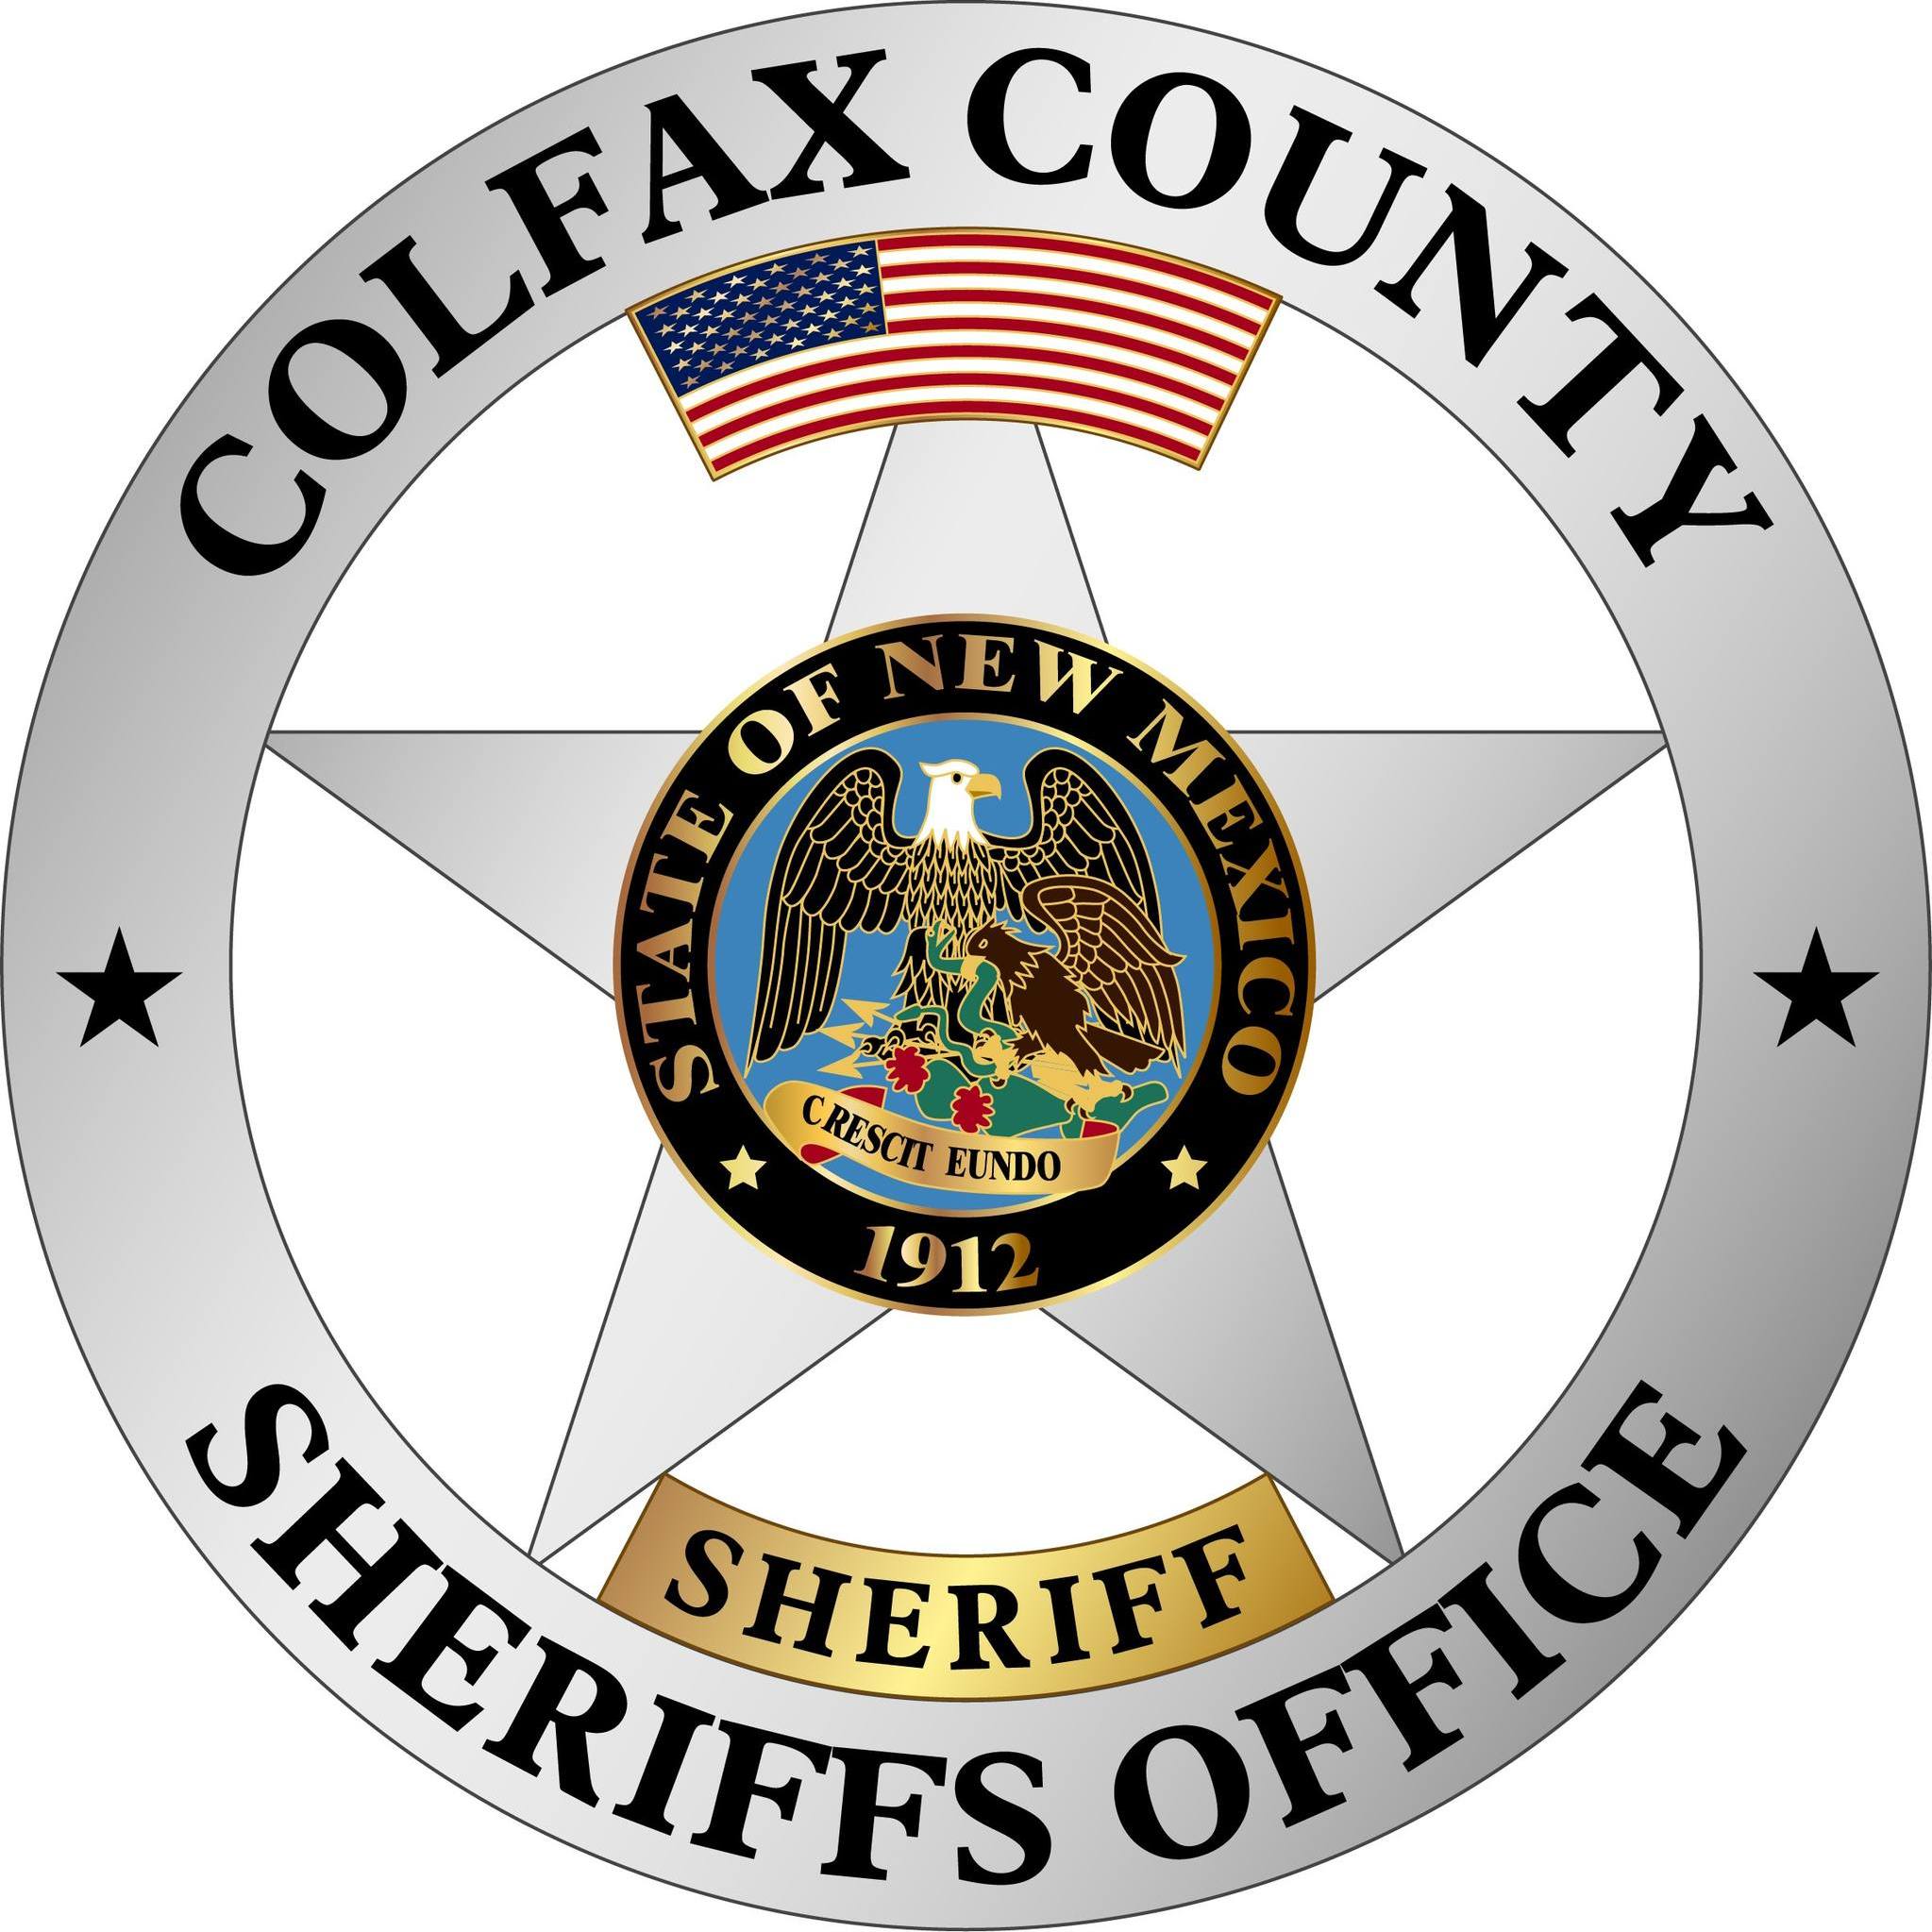 Colfax County Sheriff Department Press Release